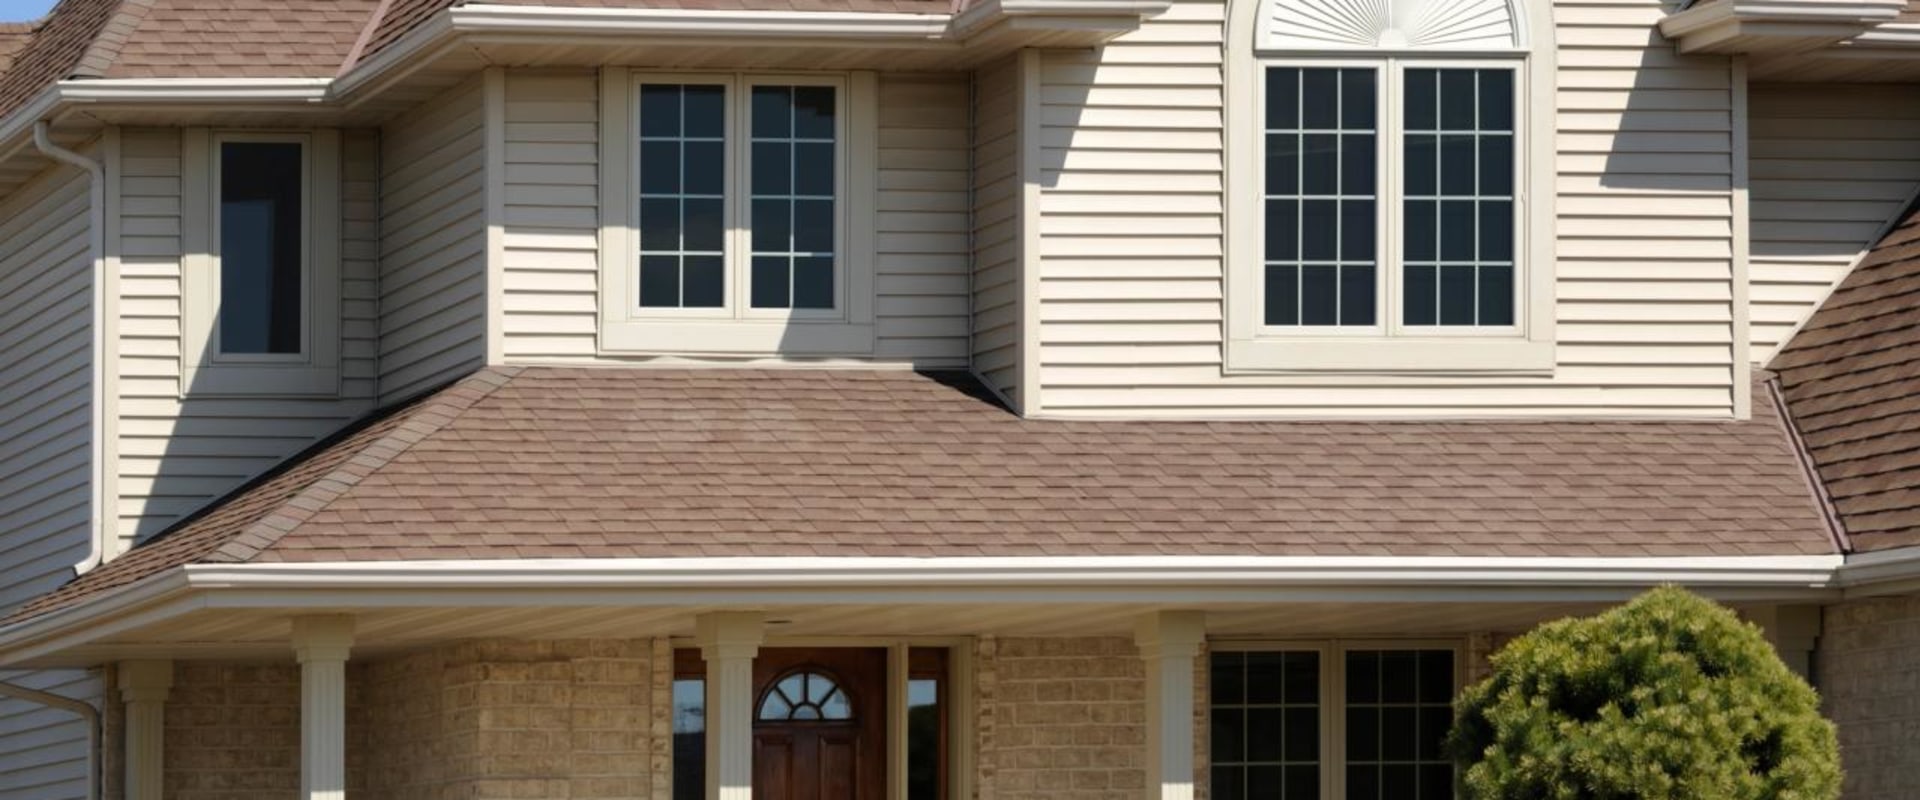 What type of roofing is best?